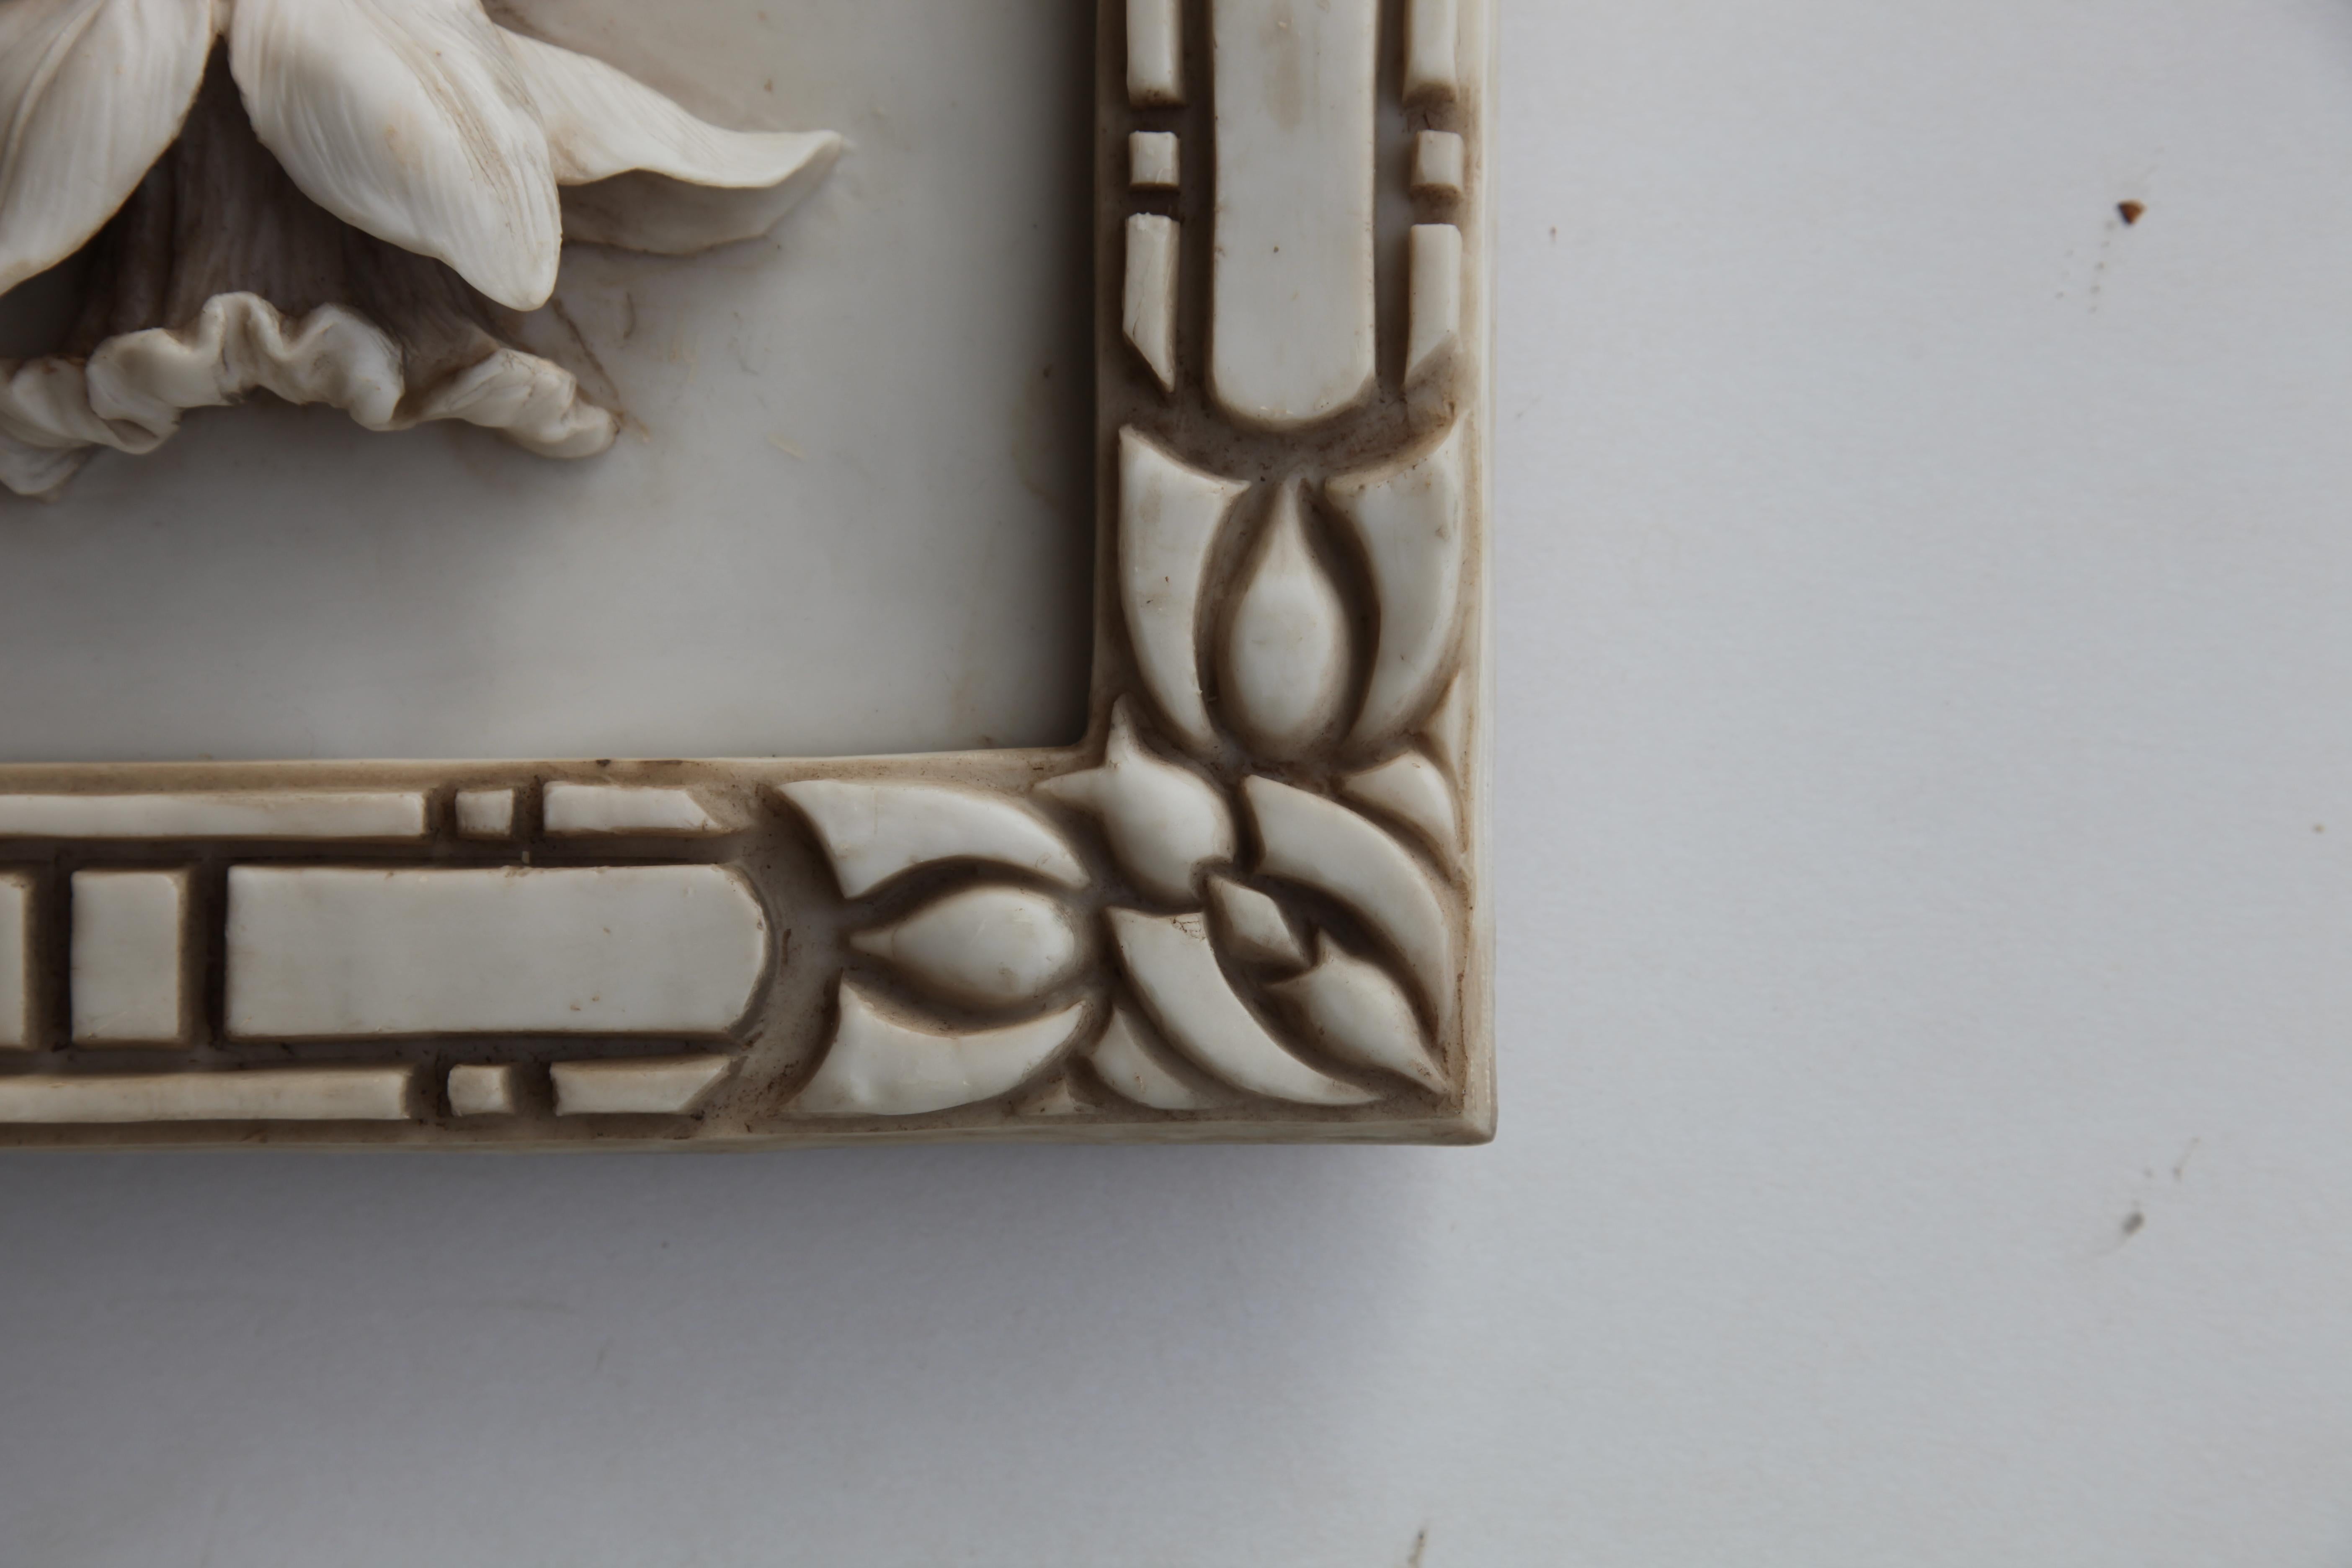 Early 20th Century Art Nouveau 3-D Alabaster Sculptural Panel with Foliage and Daffodils / Jonquils